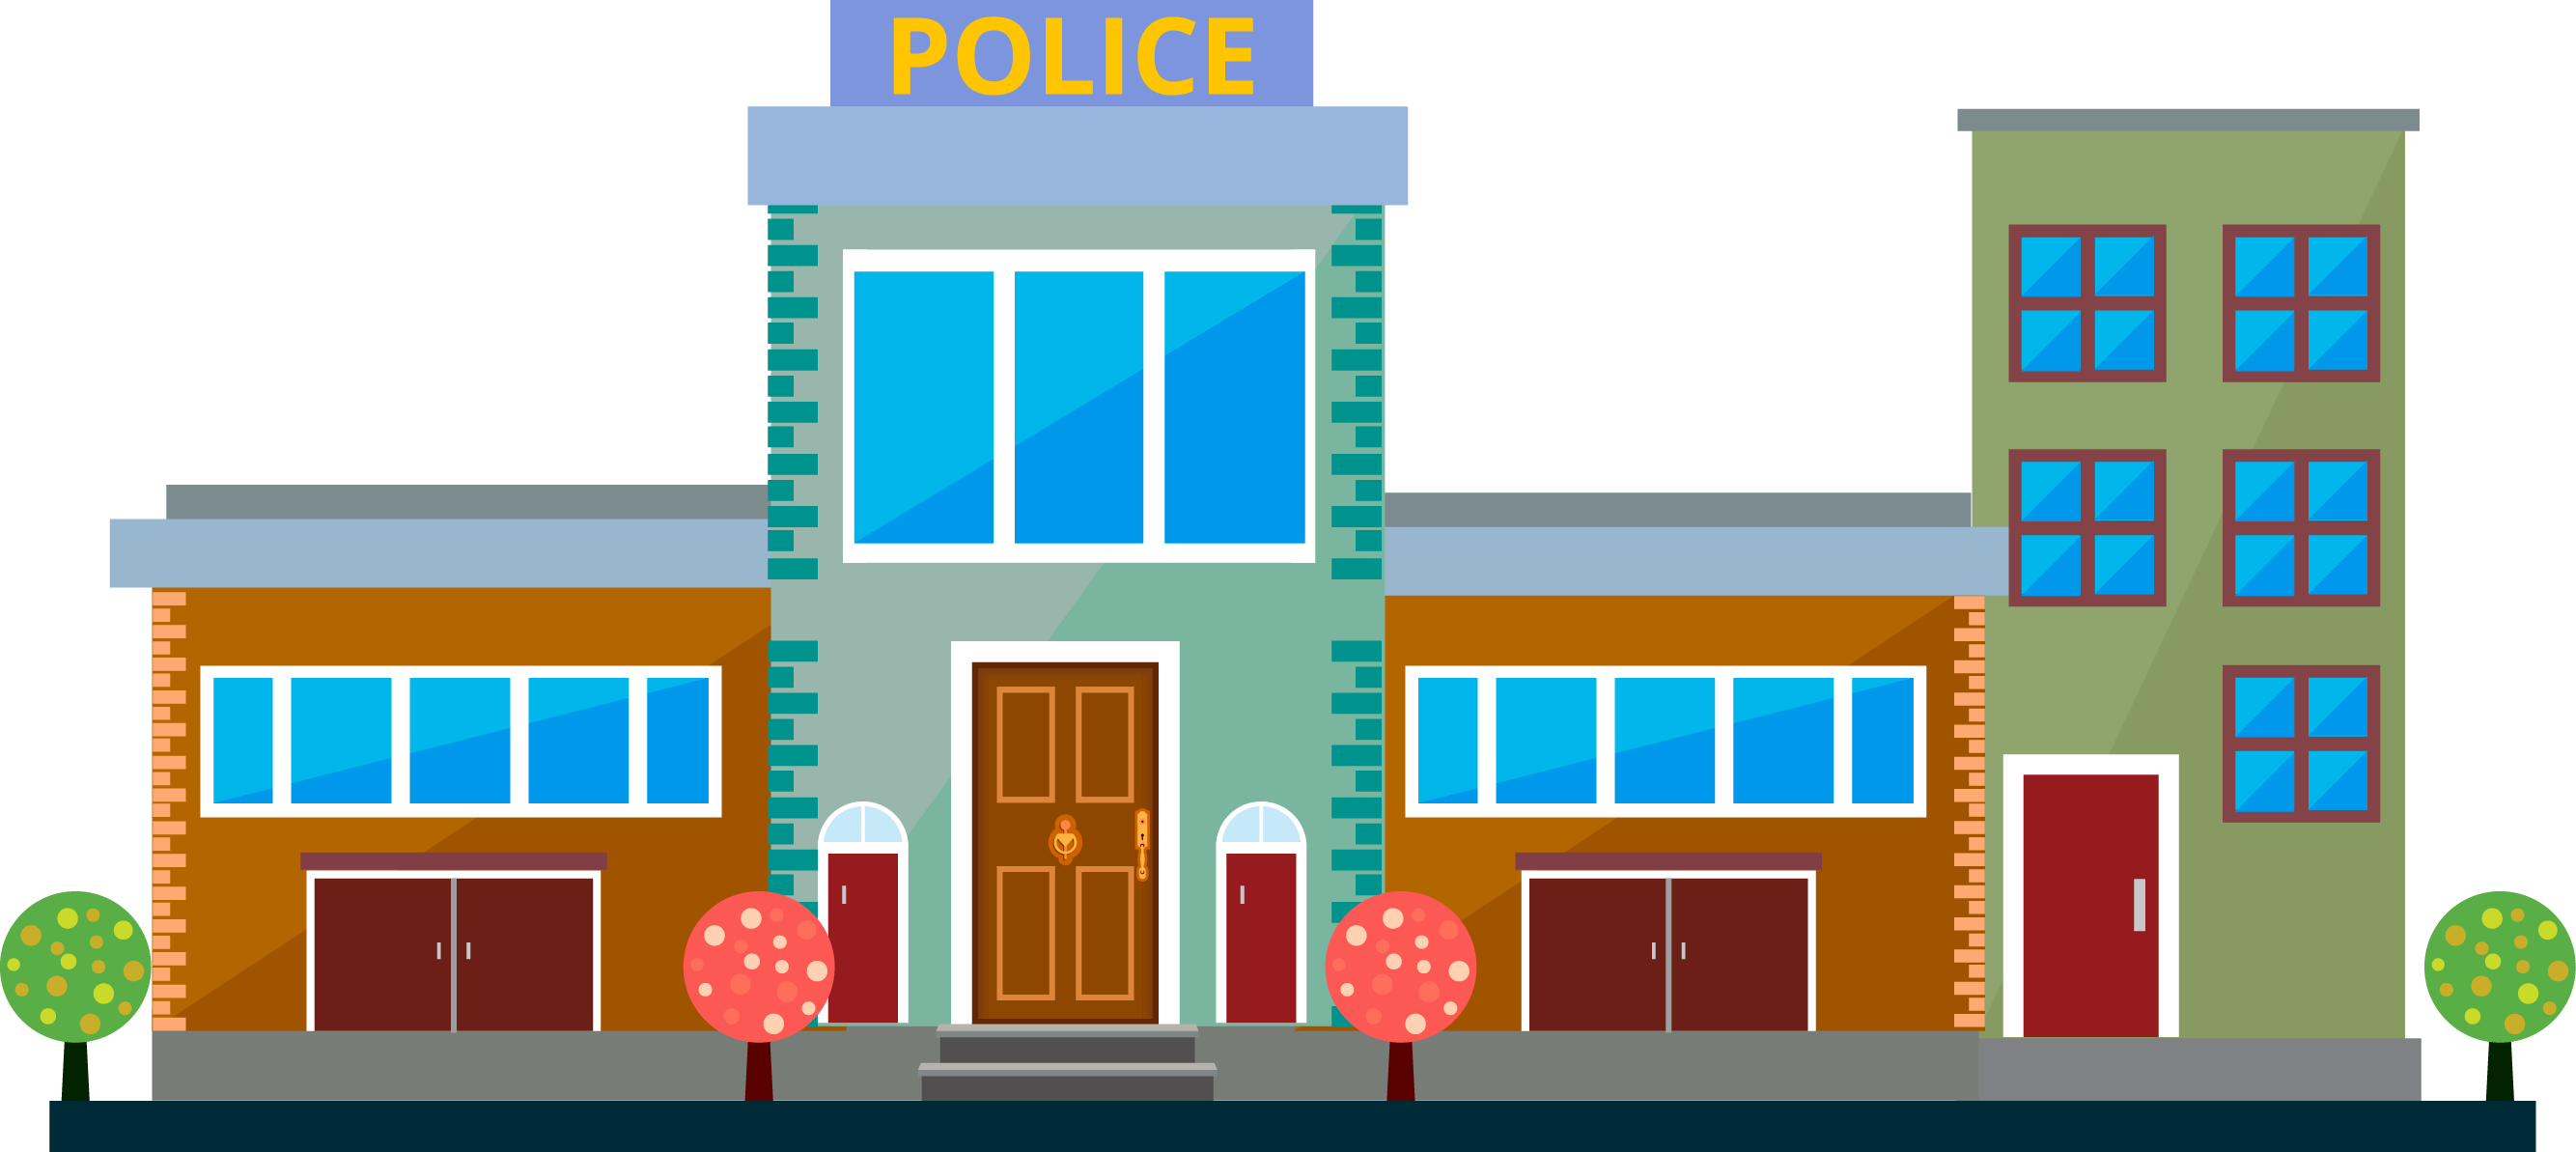 Police Station Police Officer Clip Art - Police Station Building Clipart (2668x1193)